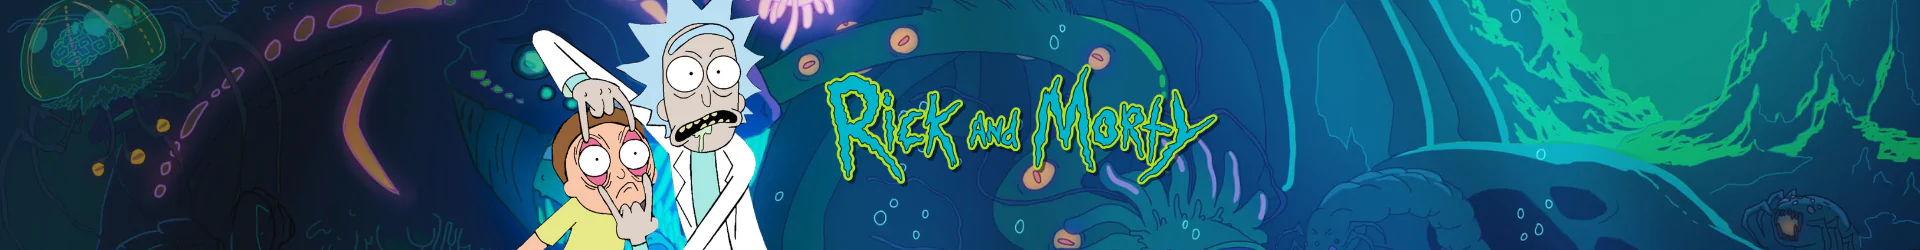 Rick and Morty posters banner